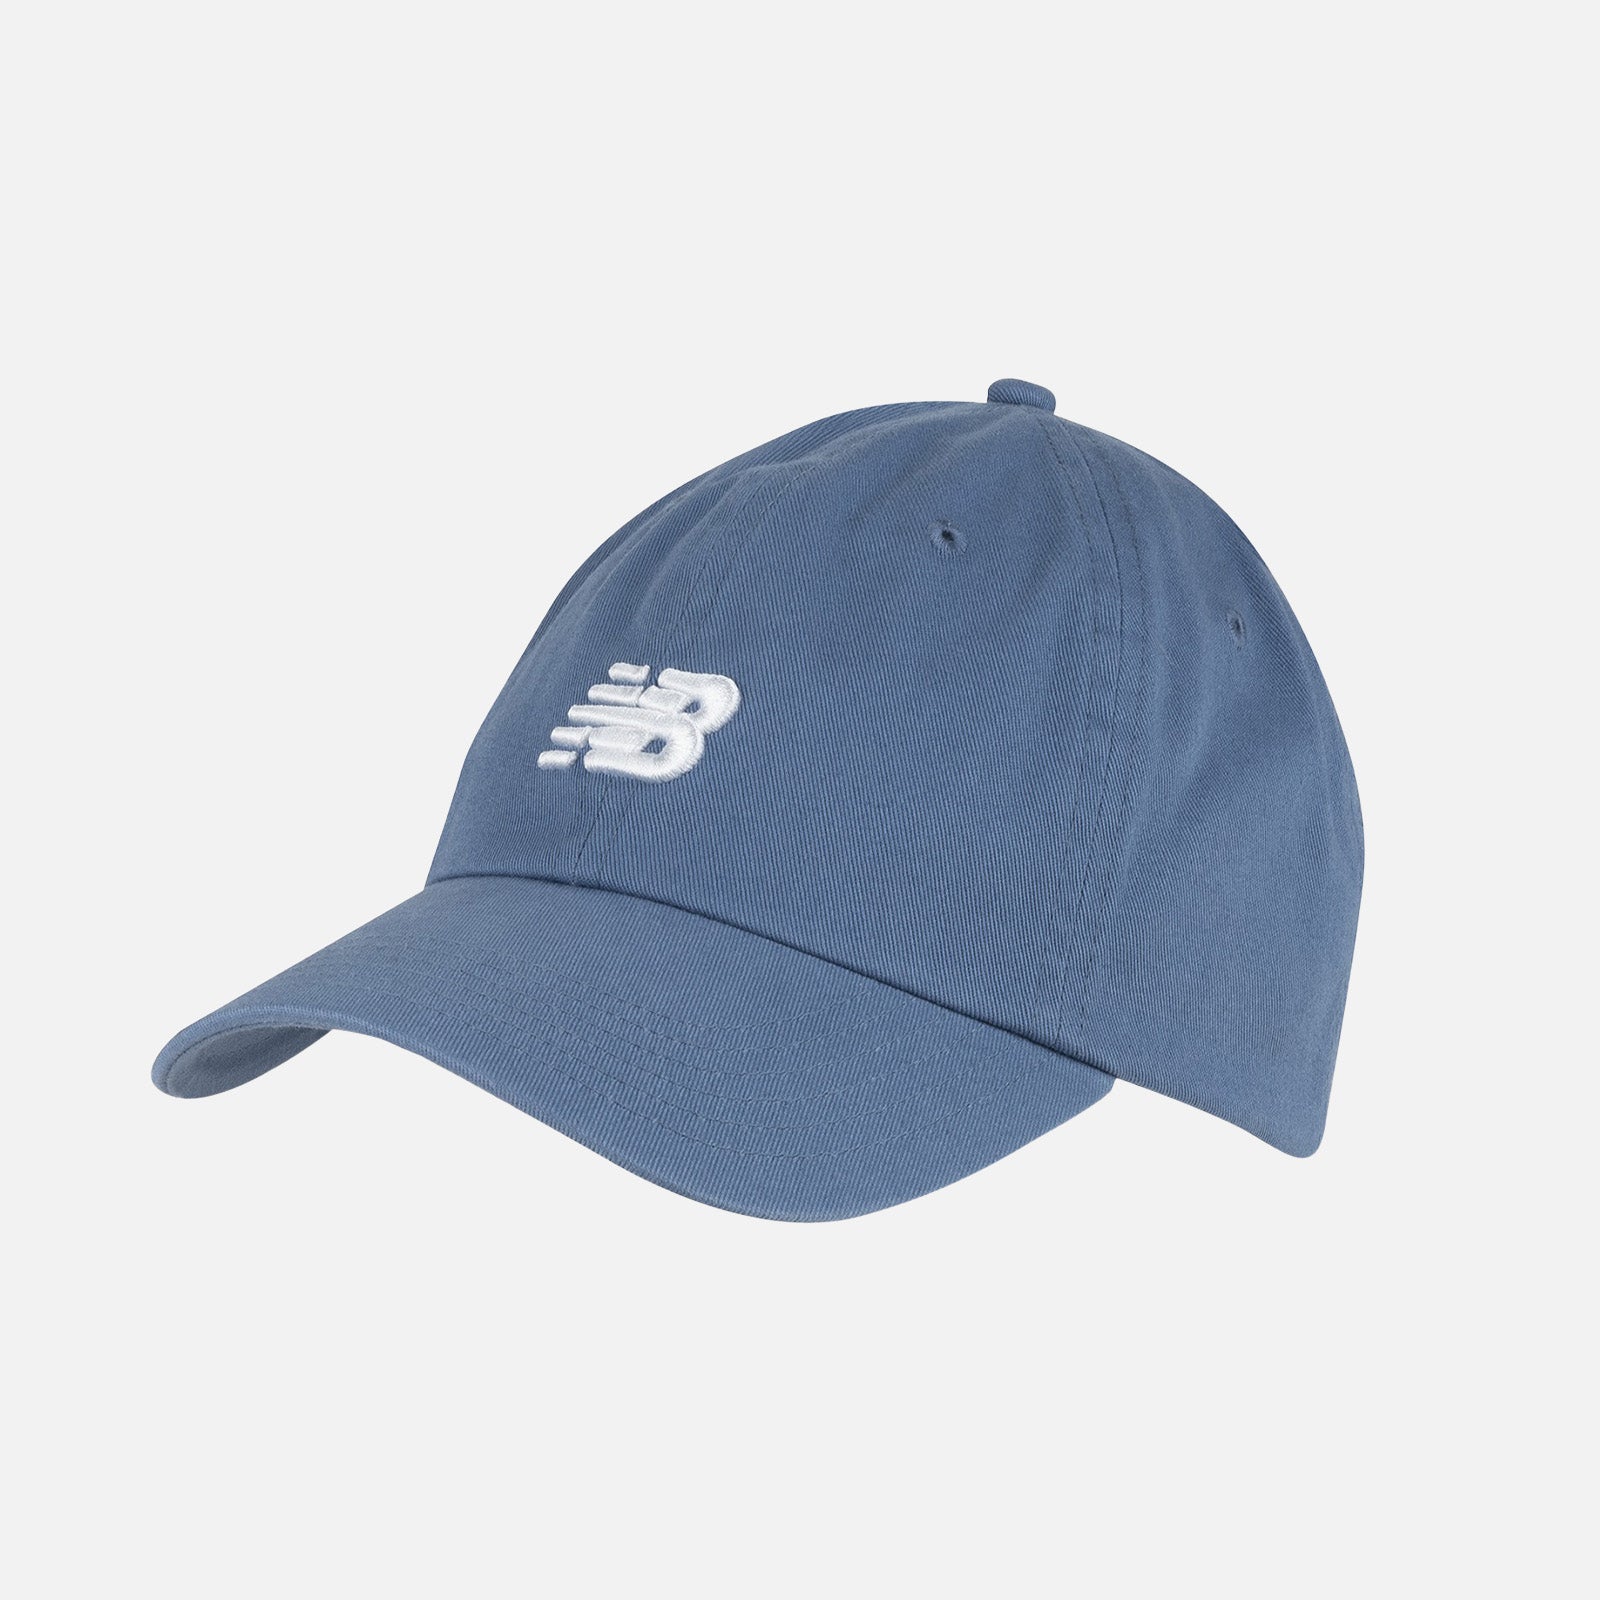 NEW BALANCE 6 PANEL Curved Brim NB Classic Cap in Mercury Blue LAH91014 O/S MERCURY BLUE FROM EIGHTYWINGOLD - OFFICIAL BRAND PARTNER